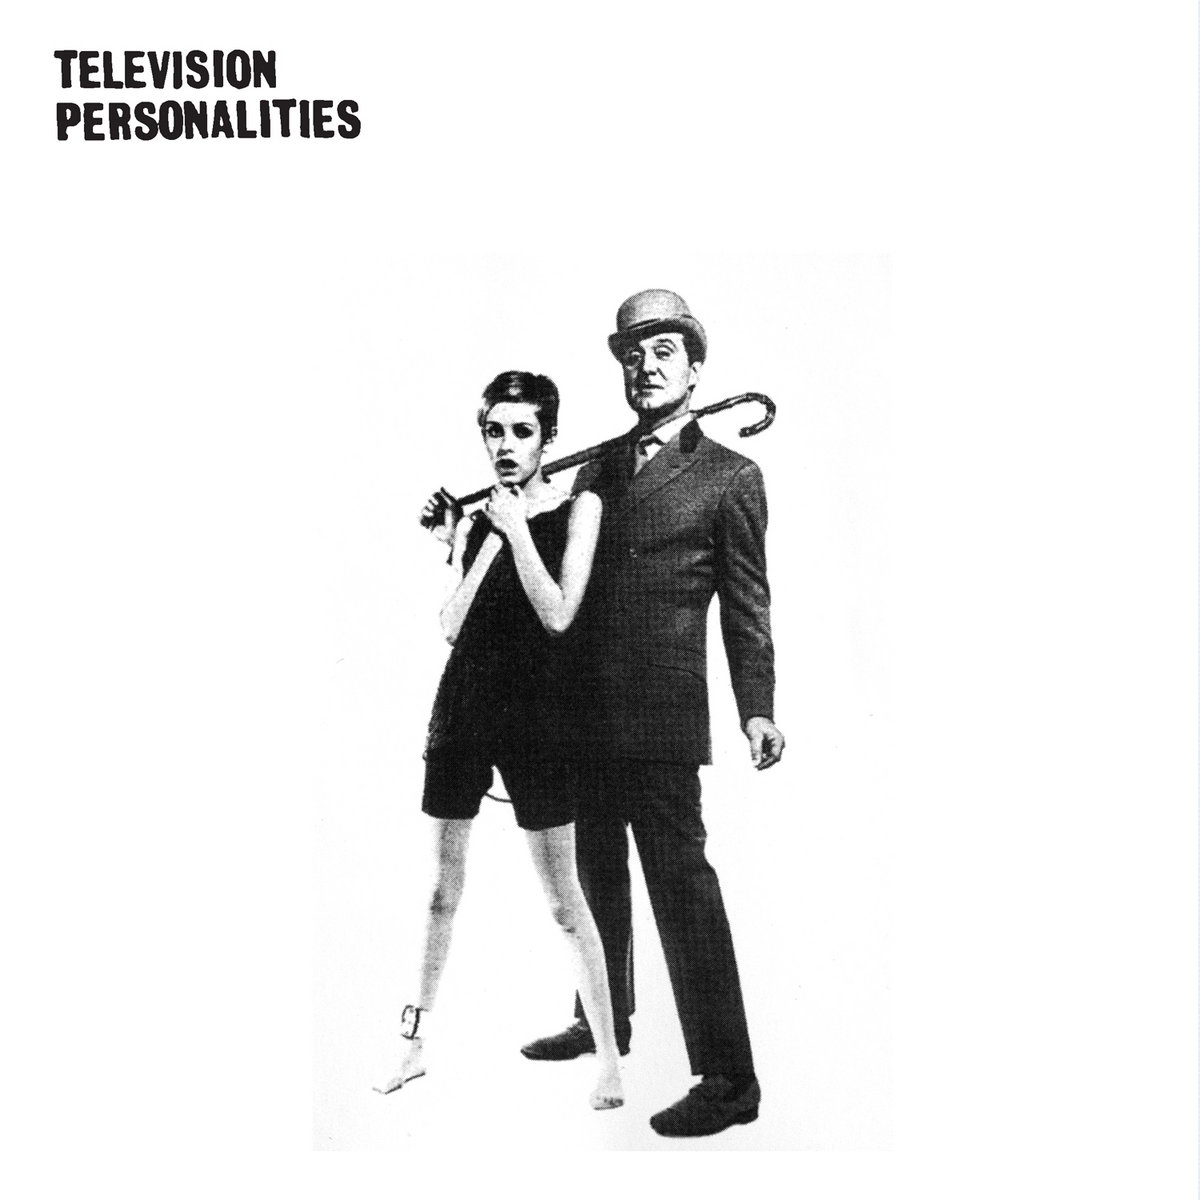 Look Back in Anger / Television Personalities (1981)

youtu.be/CF77I3gNVI4

#TelevisionPersonalities
#AndDontTheKidsJustLoveIt